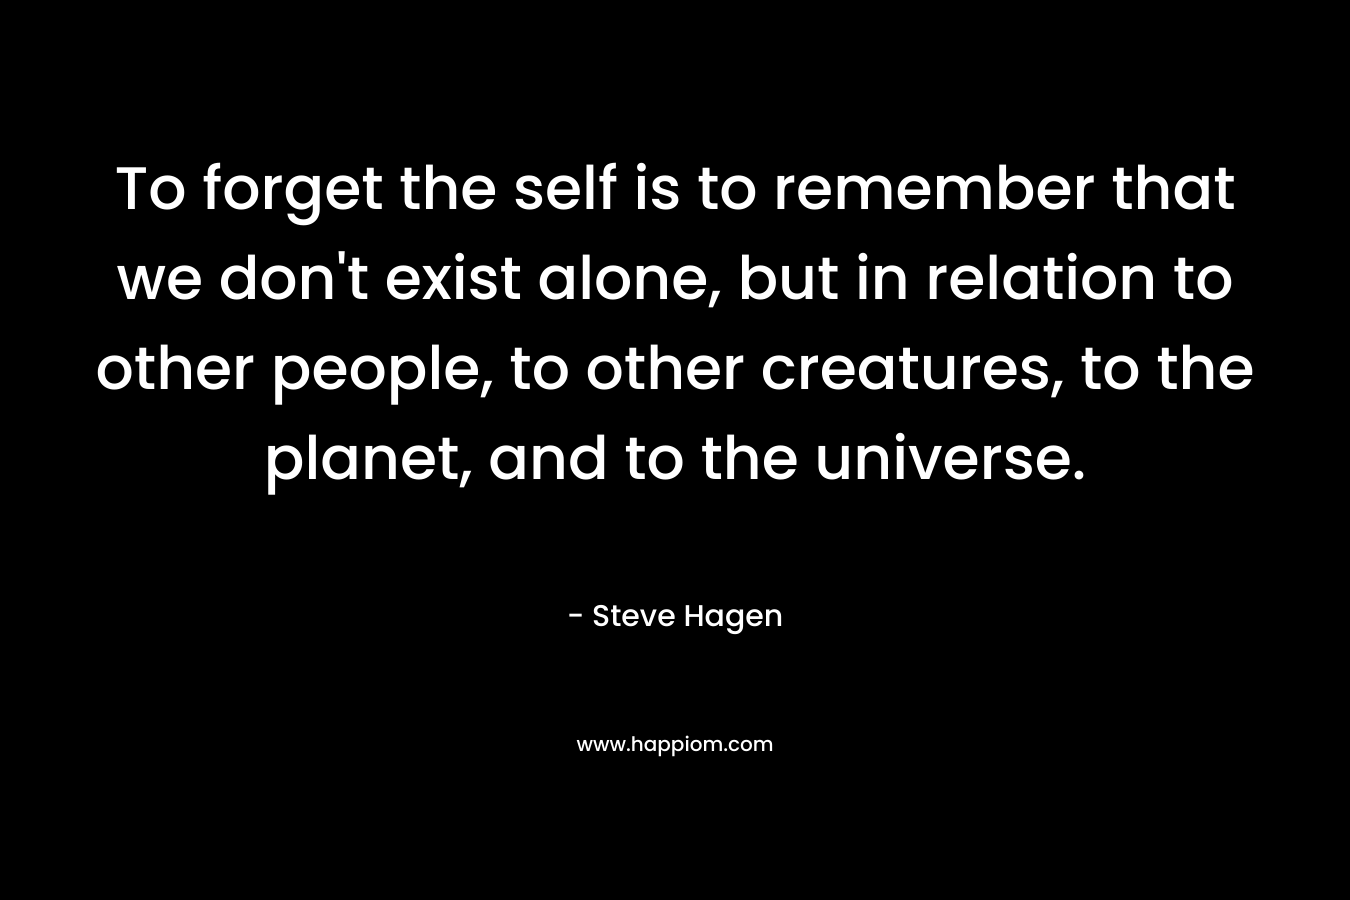 To forget the self is to remember that we don’t exist alone, but in relation to other people, to other creatures, to the planet, and to the universe. – Steve Hagen